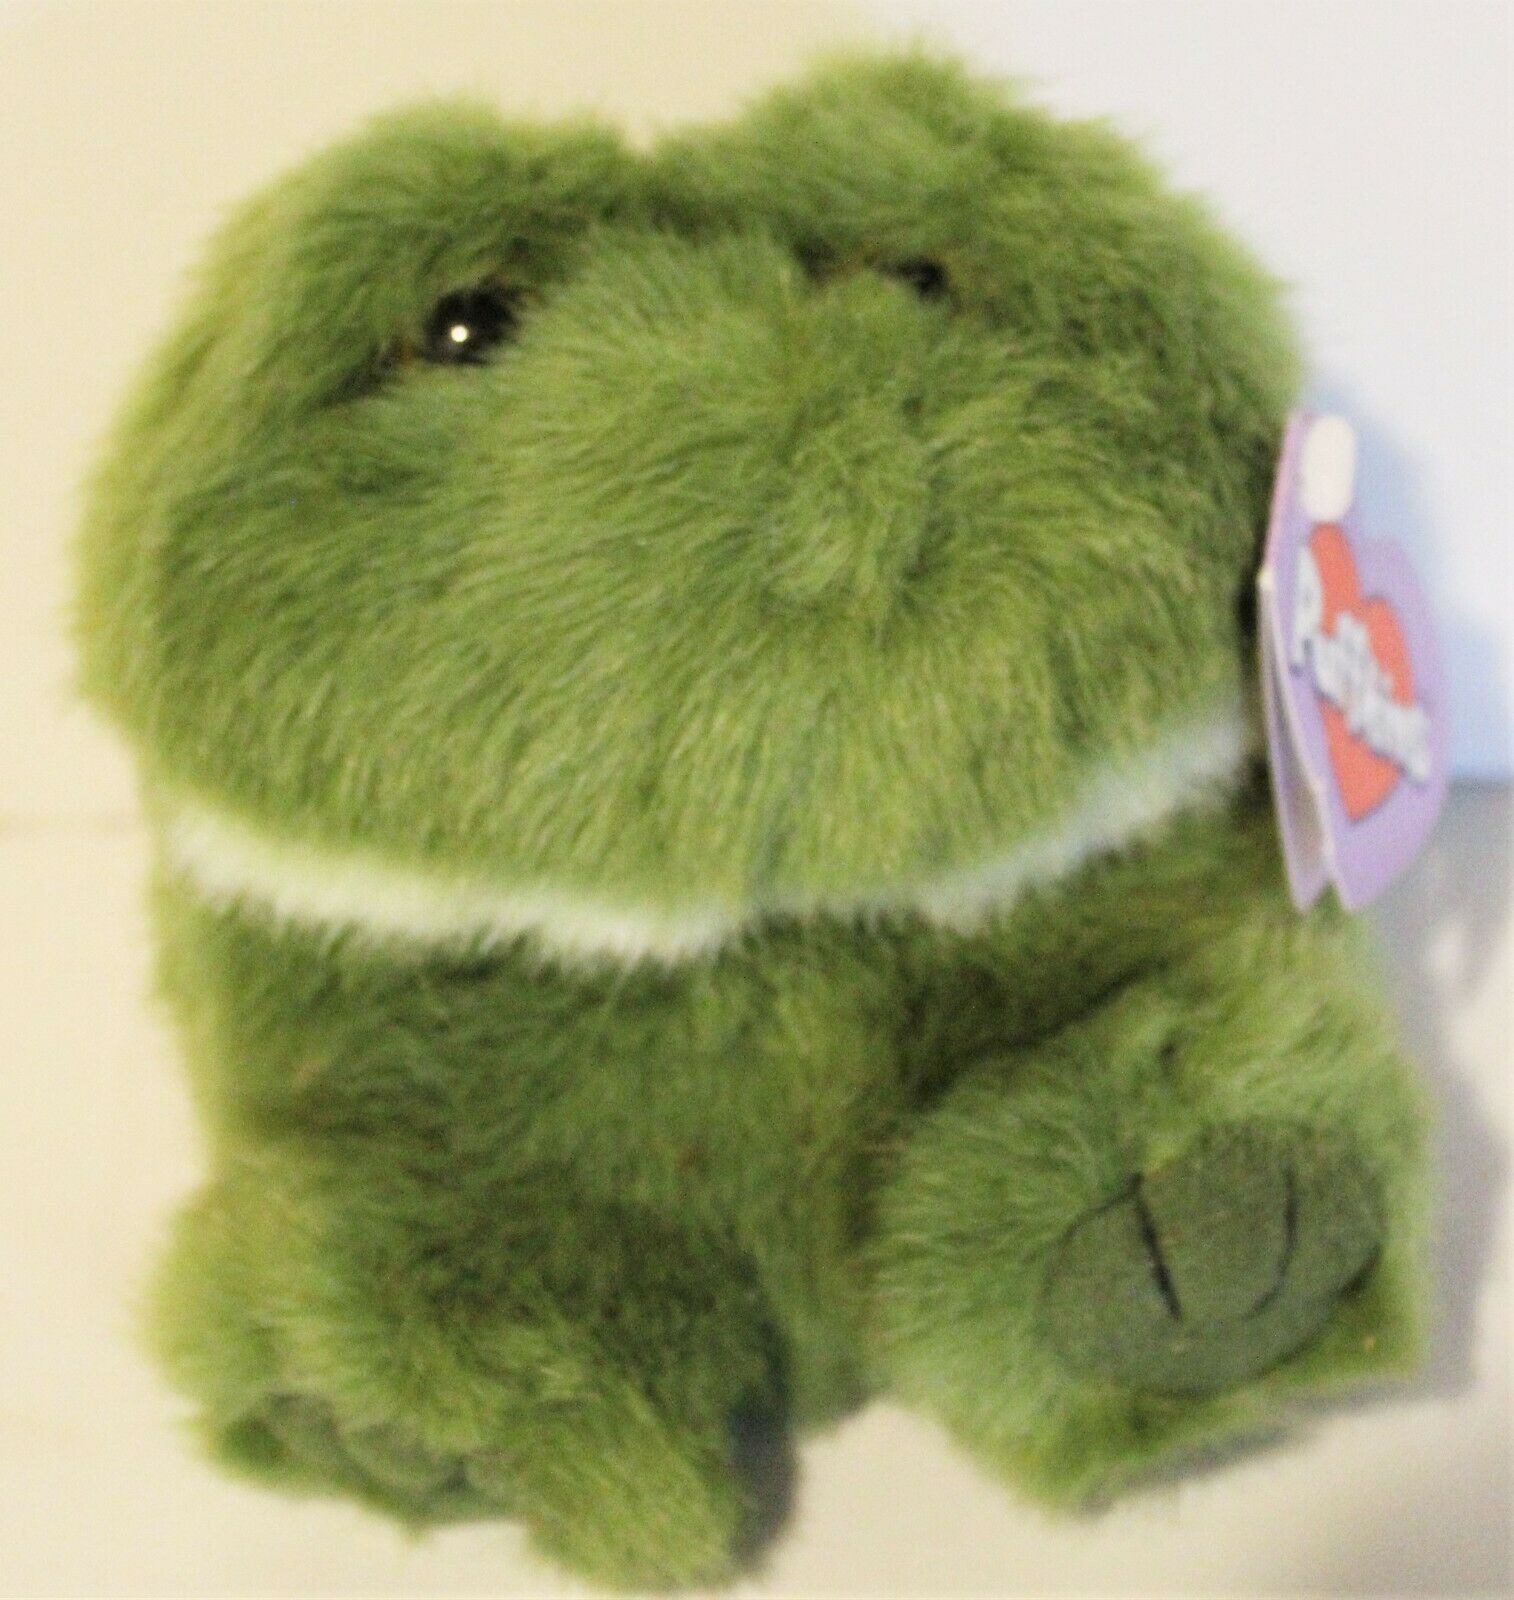 1997 Vintage Lily The Frog Plush Puffkins Swibco With Tags Style 6600 Free Ship